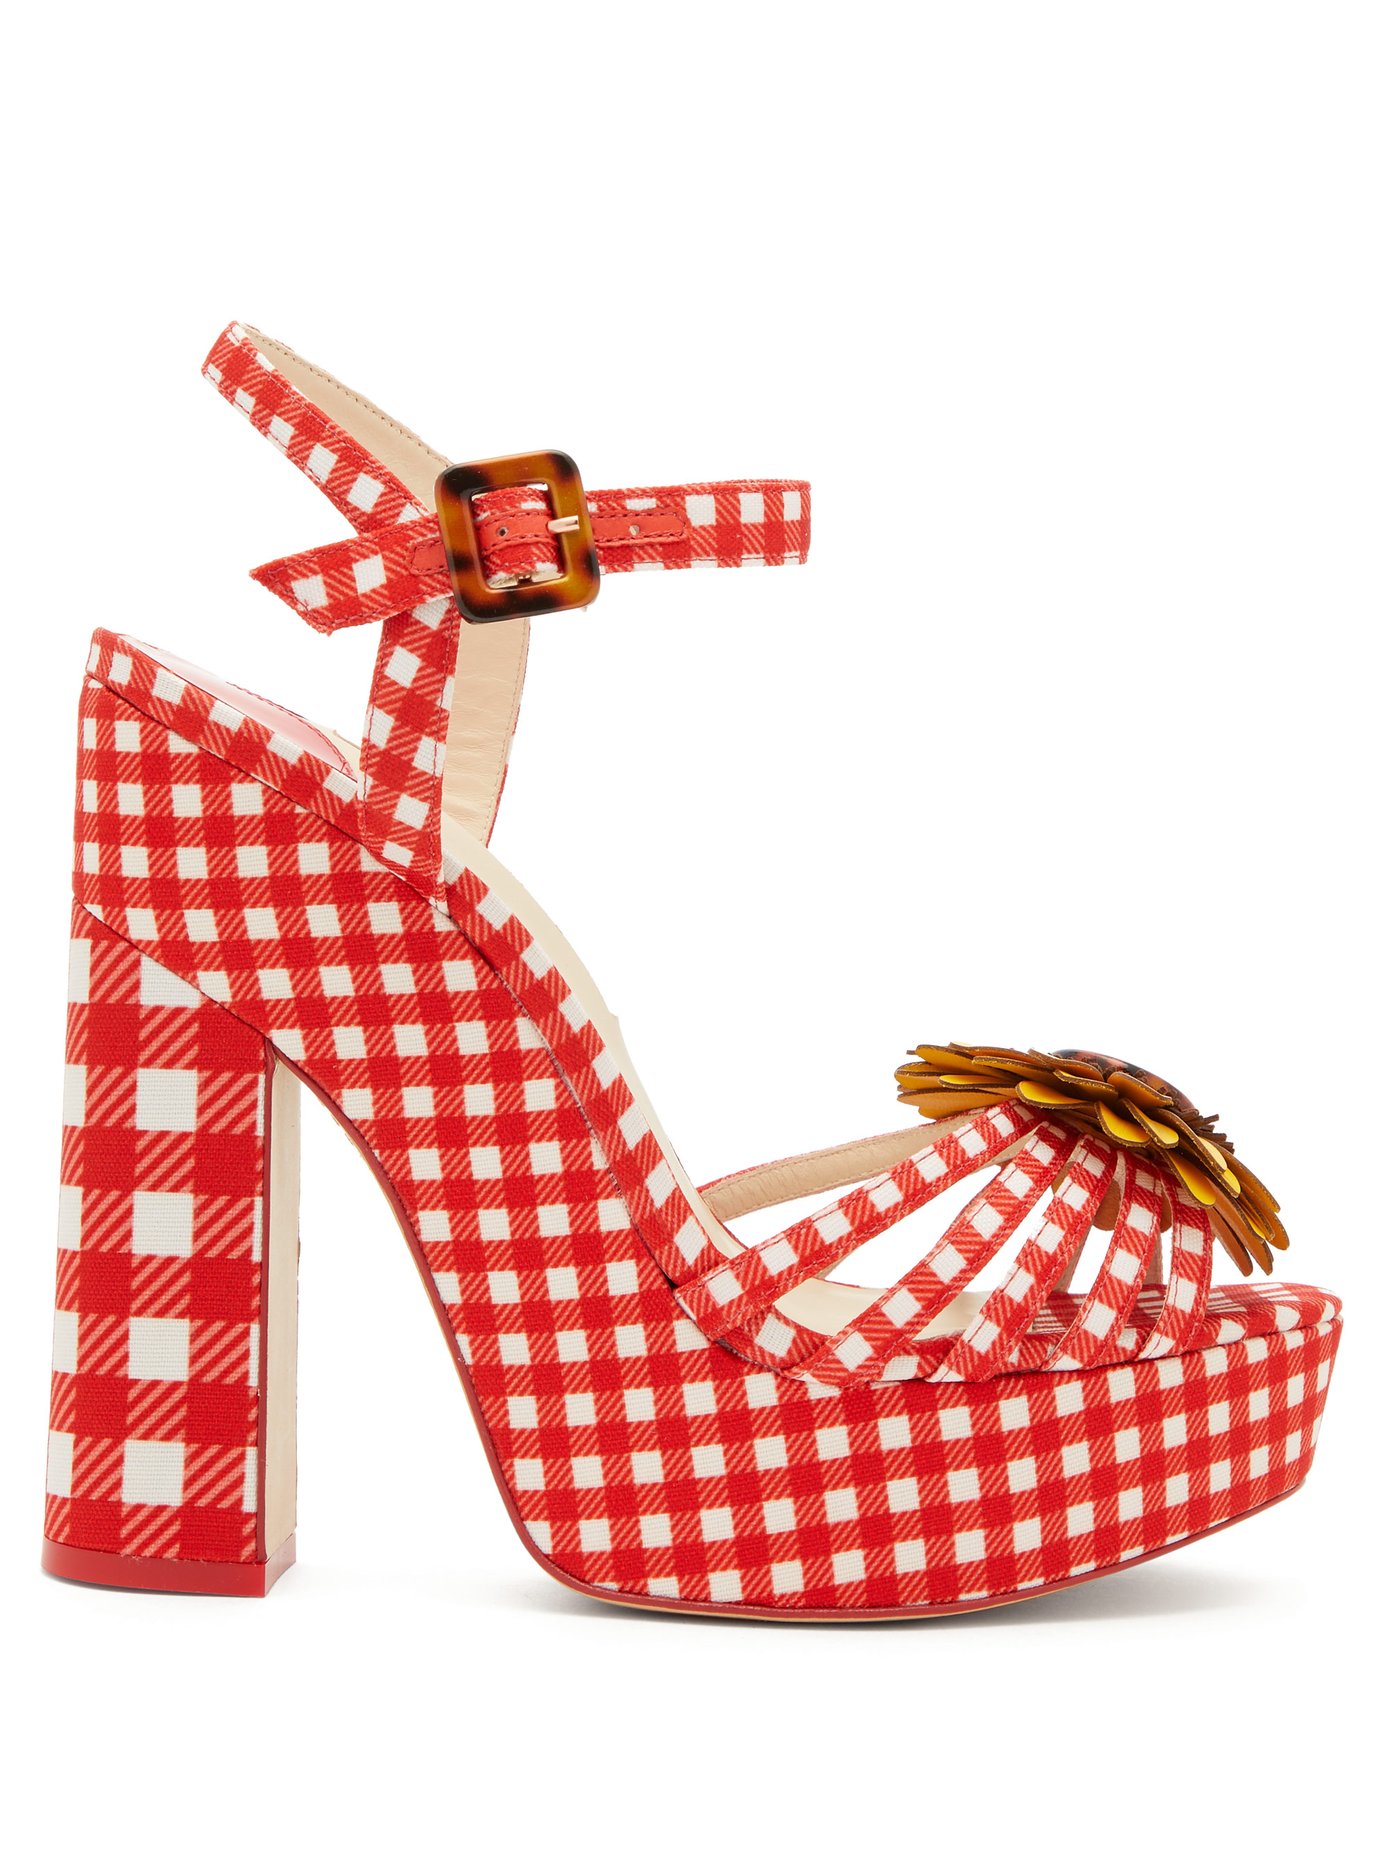 red gingham sandals